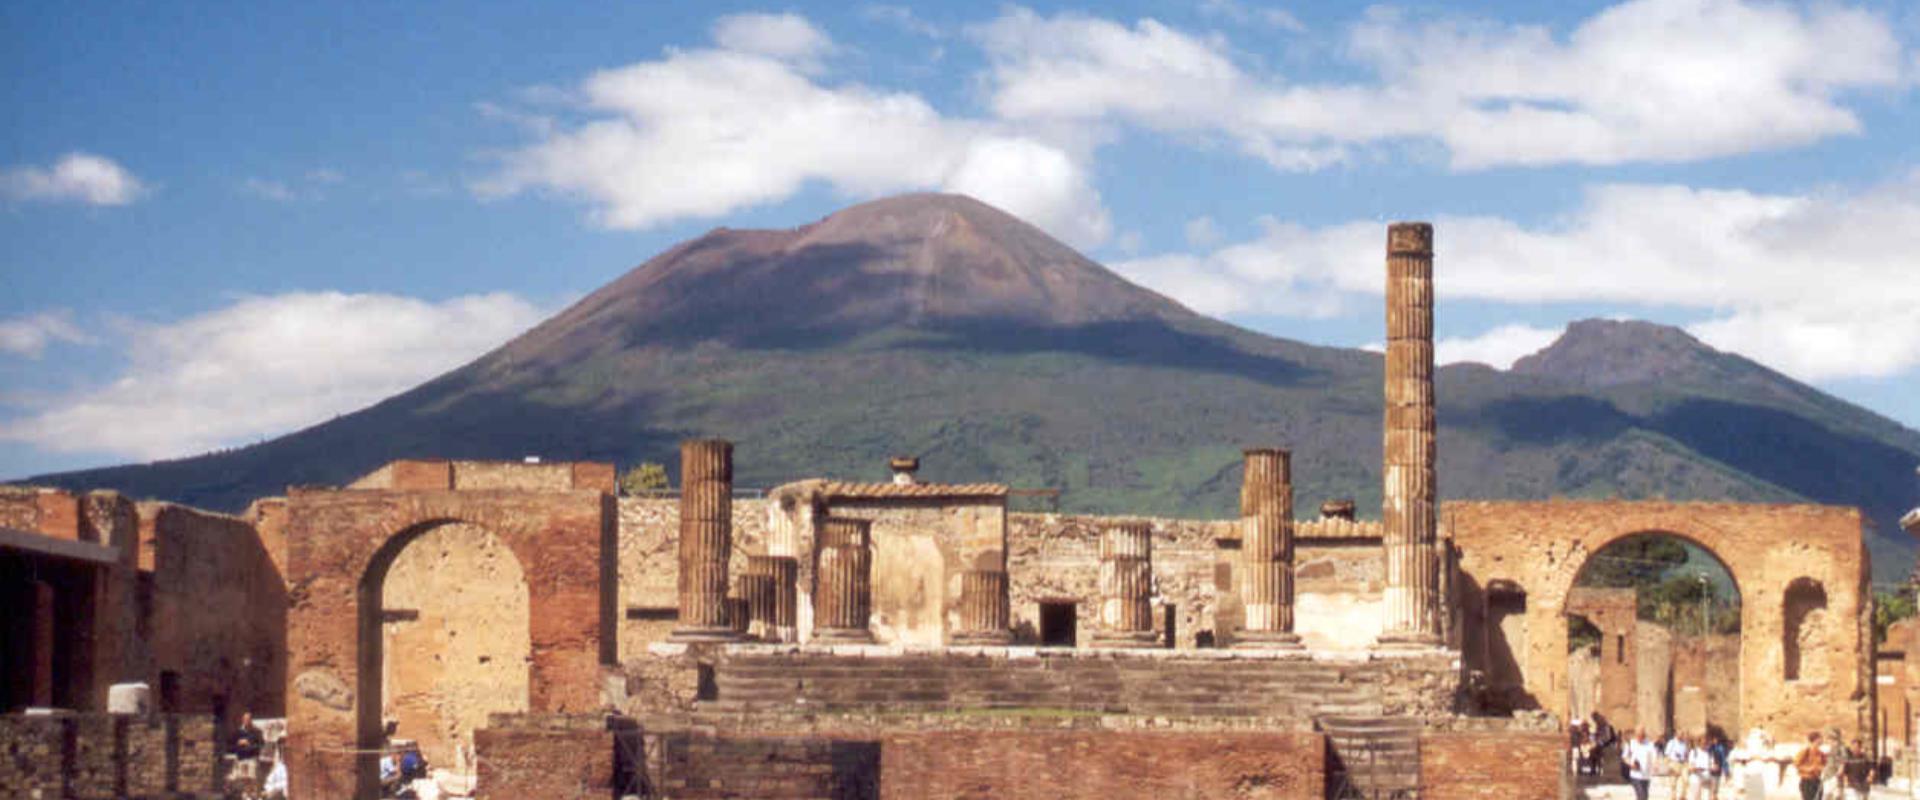 Discover the archaeological site of Pompeii and reserve your room at the BW Signature Collection Hotel Paradiso!